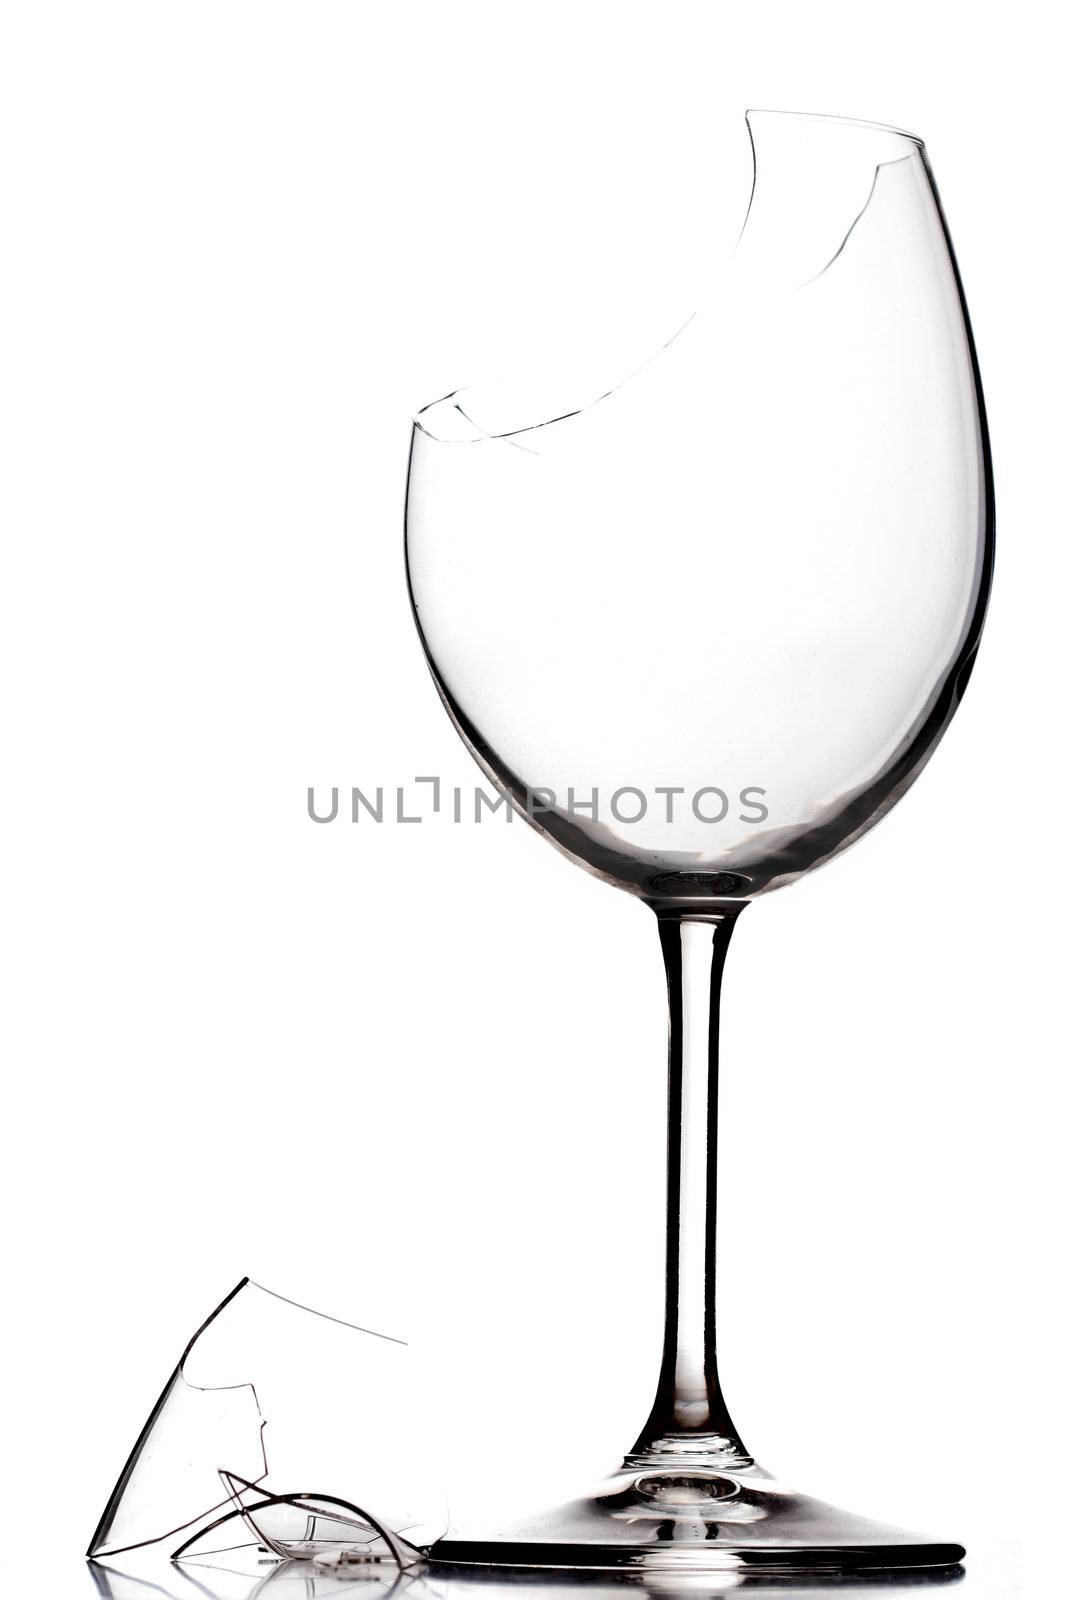 broken crystal wine glass, isolated on white